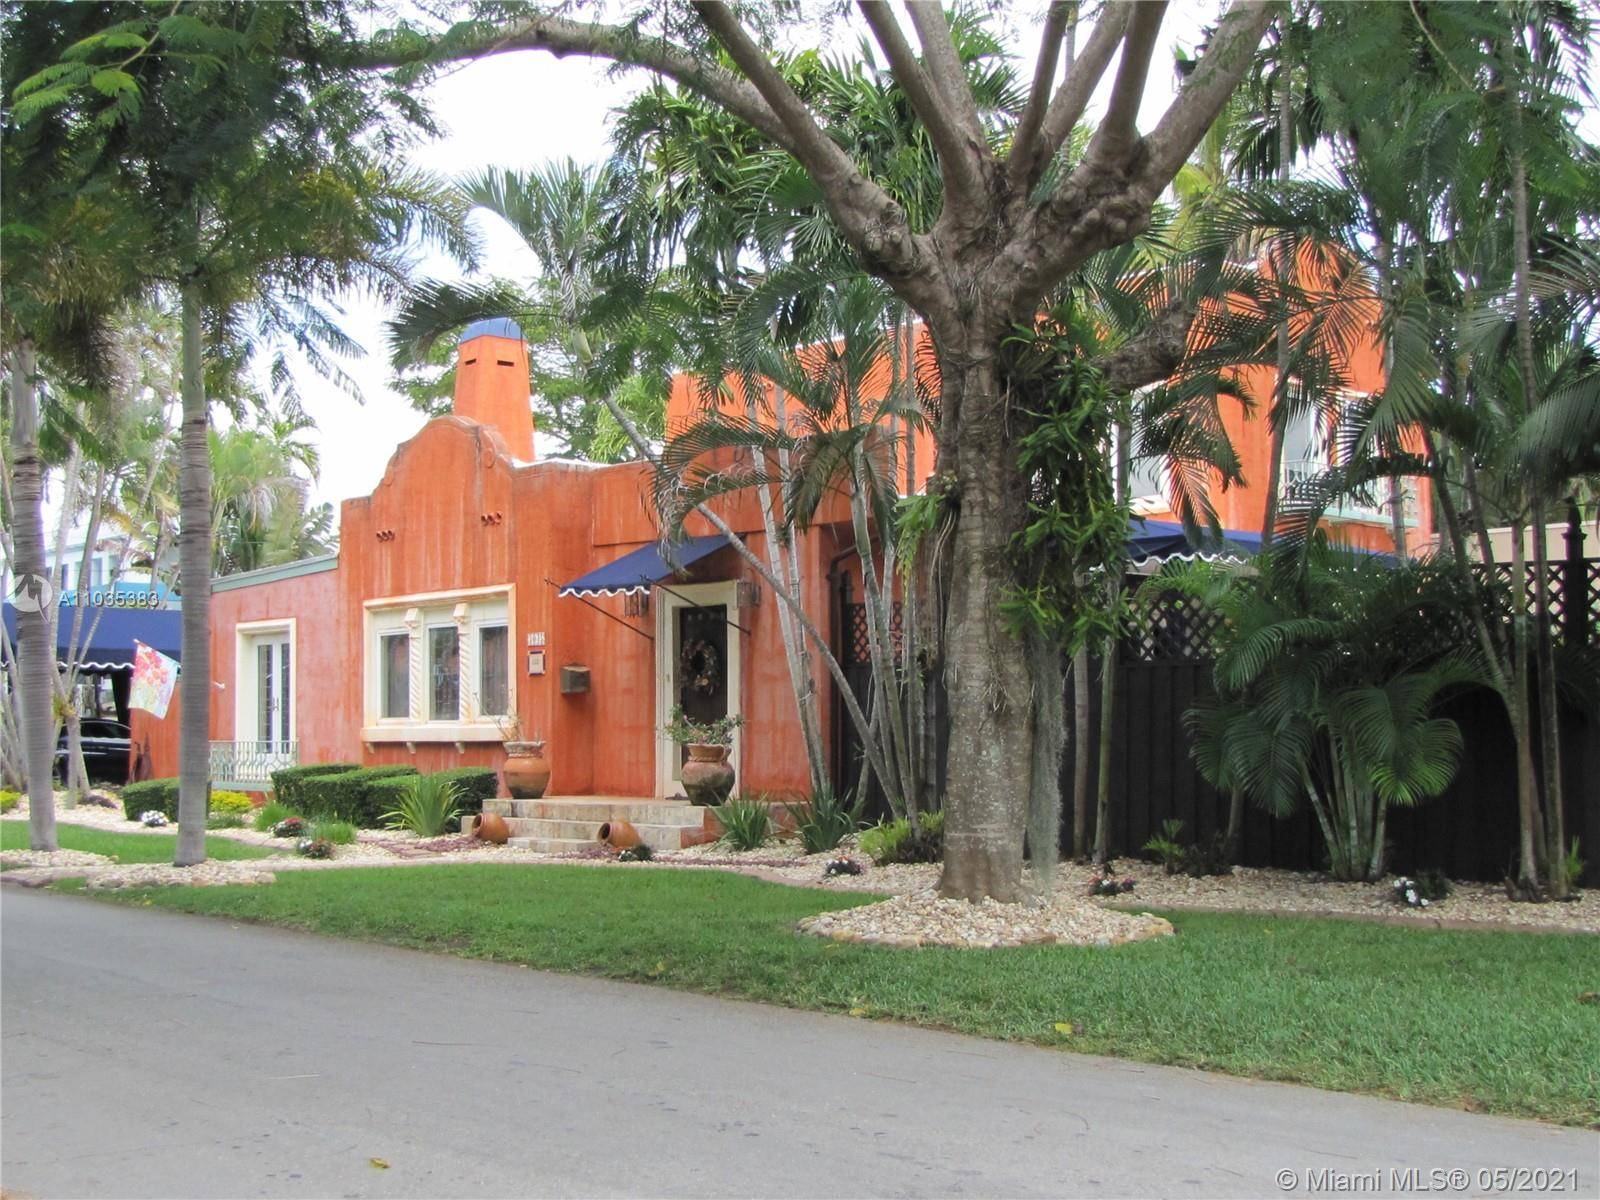 Charming Coconut Grove Mediterranean style house built in 1924.